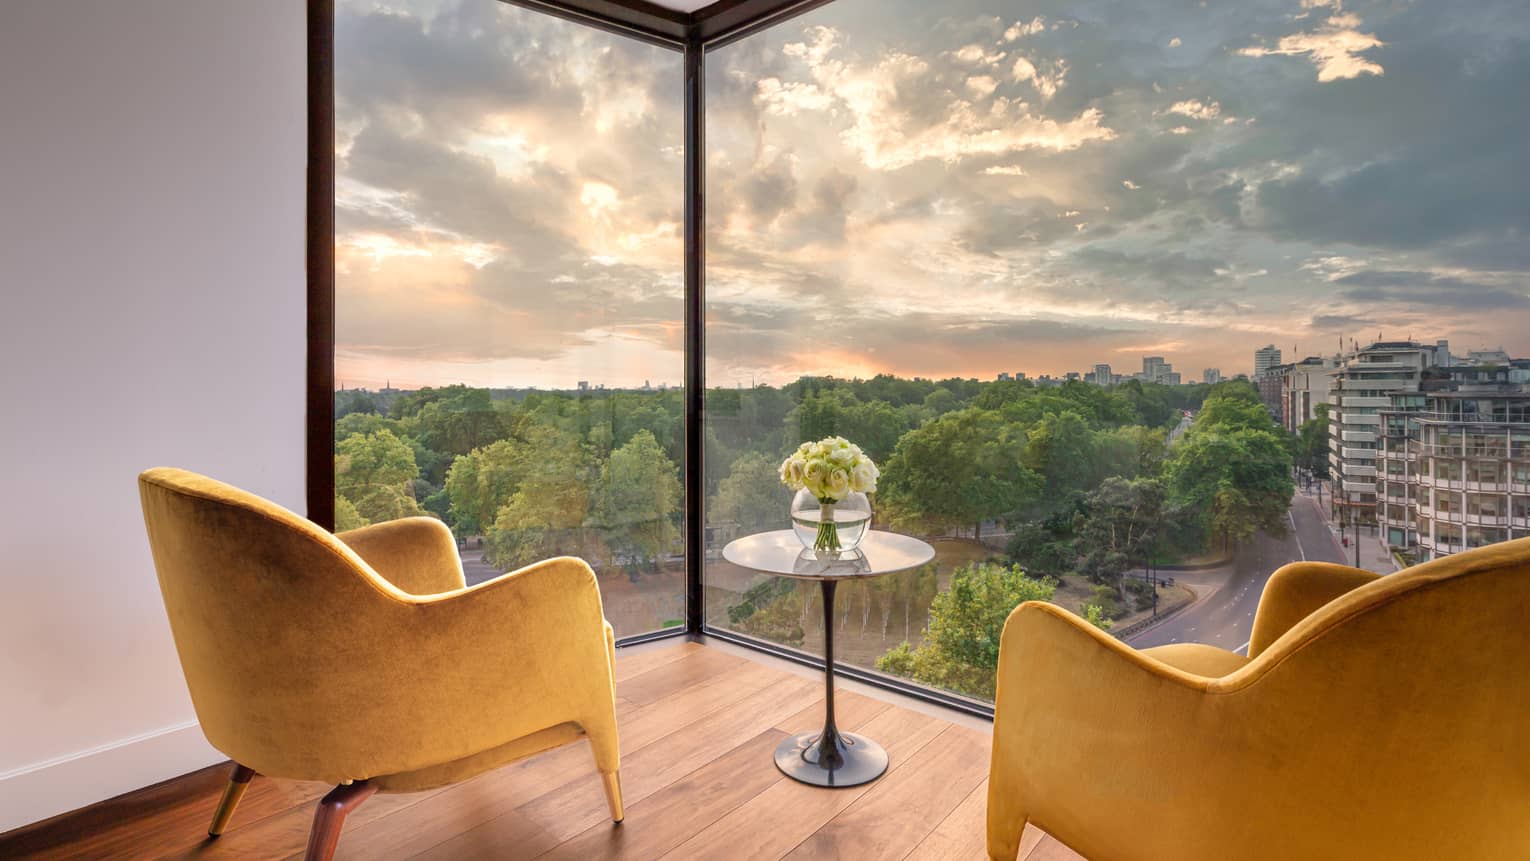 Two mustard-coloured club chairs and small round table on wood floor with views from large window